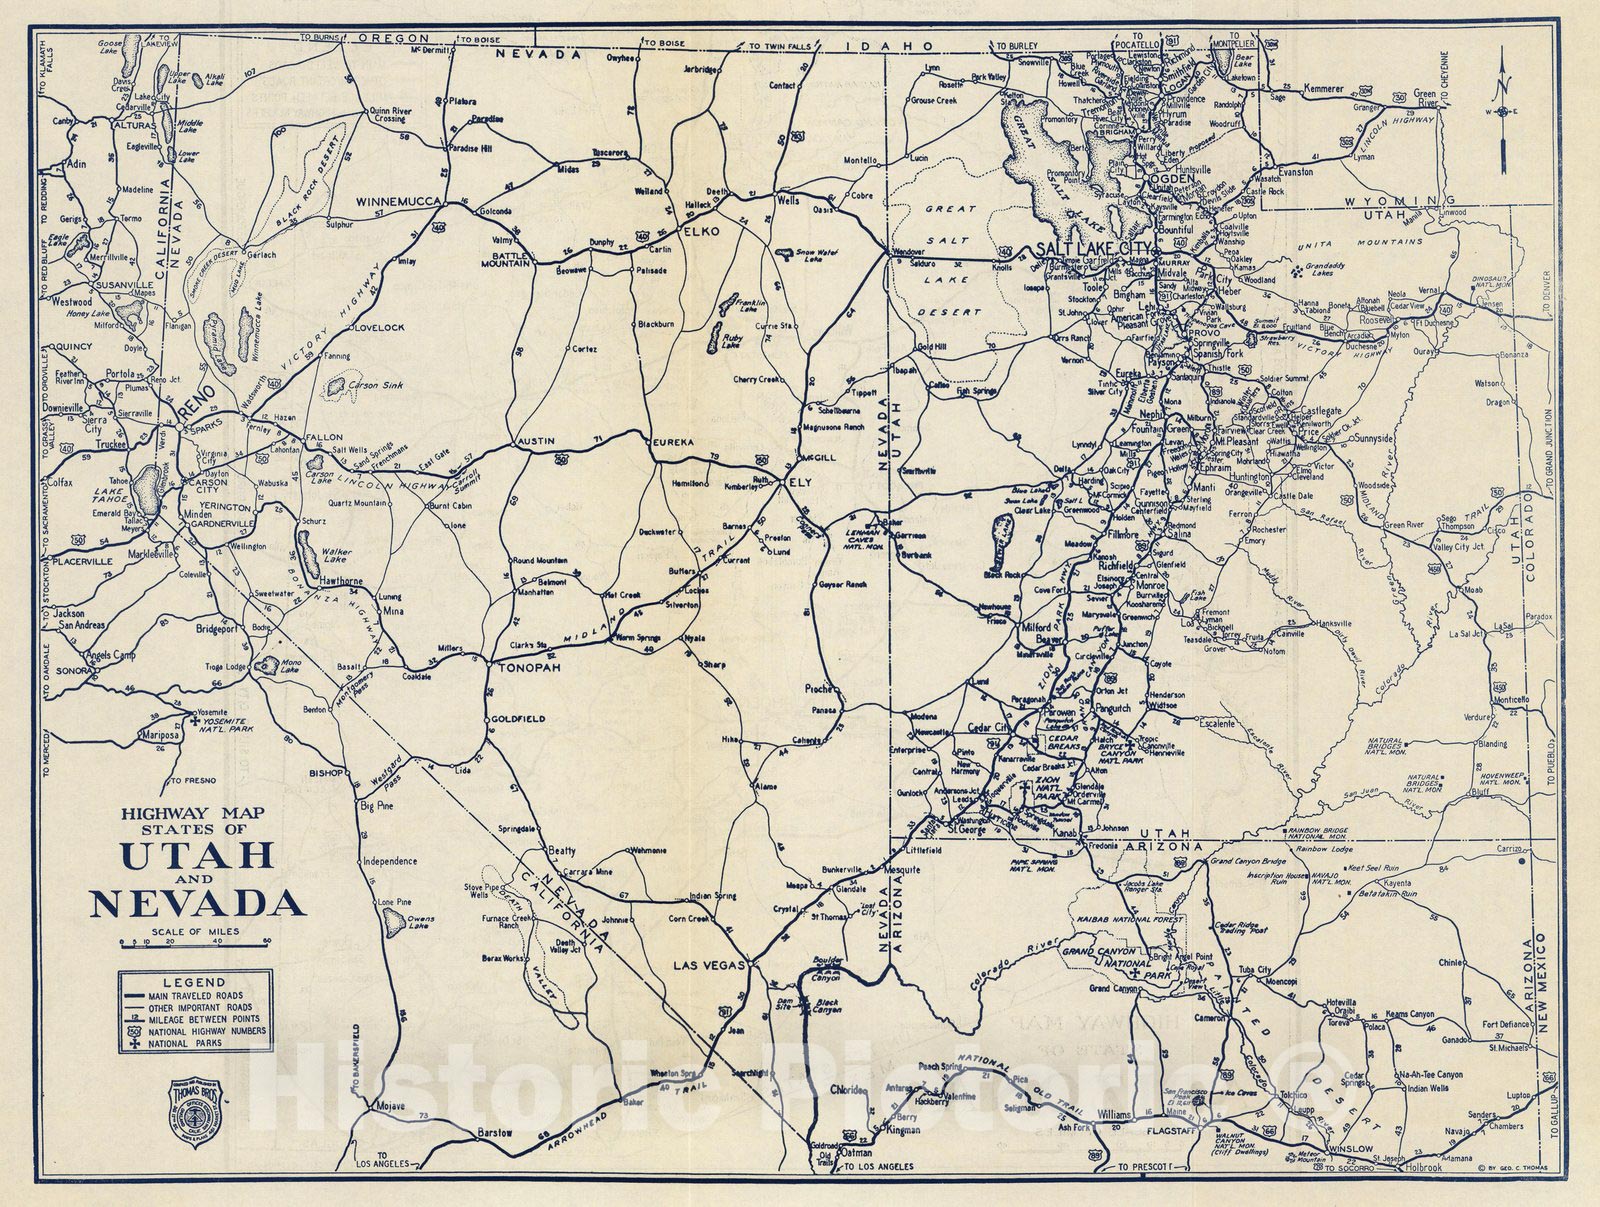 Historic Map : Highway Map States of Utah and Nevada, 1938 - Vintage Wall Art